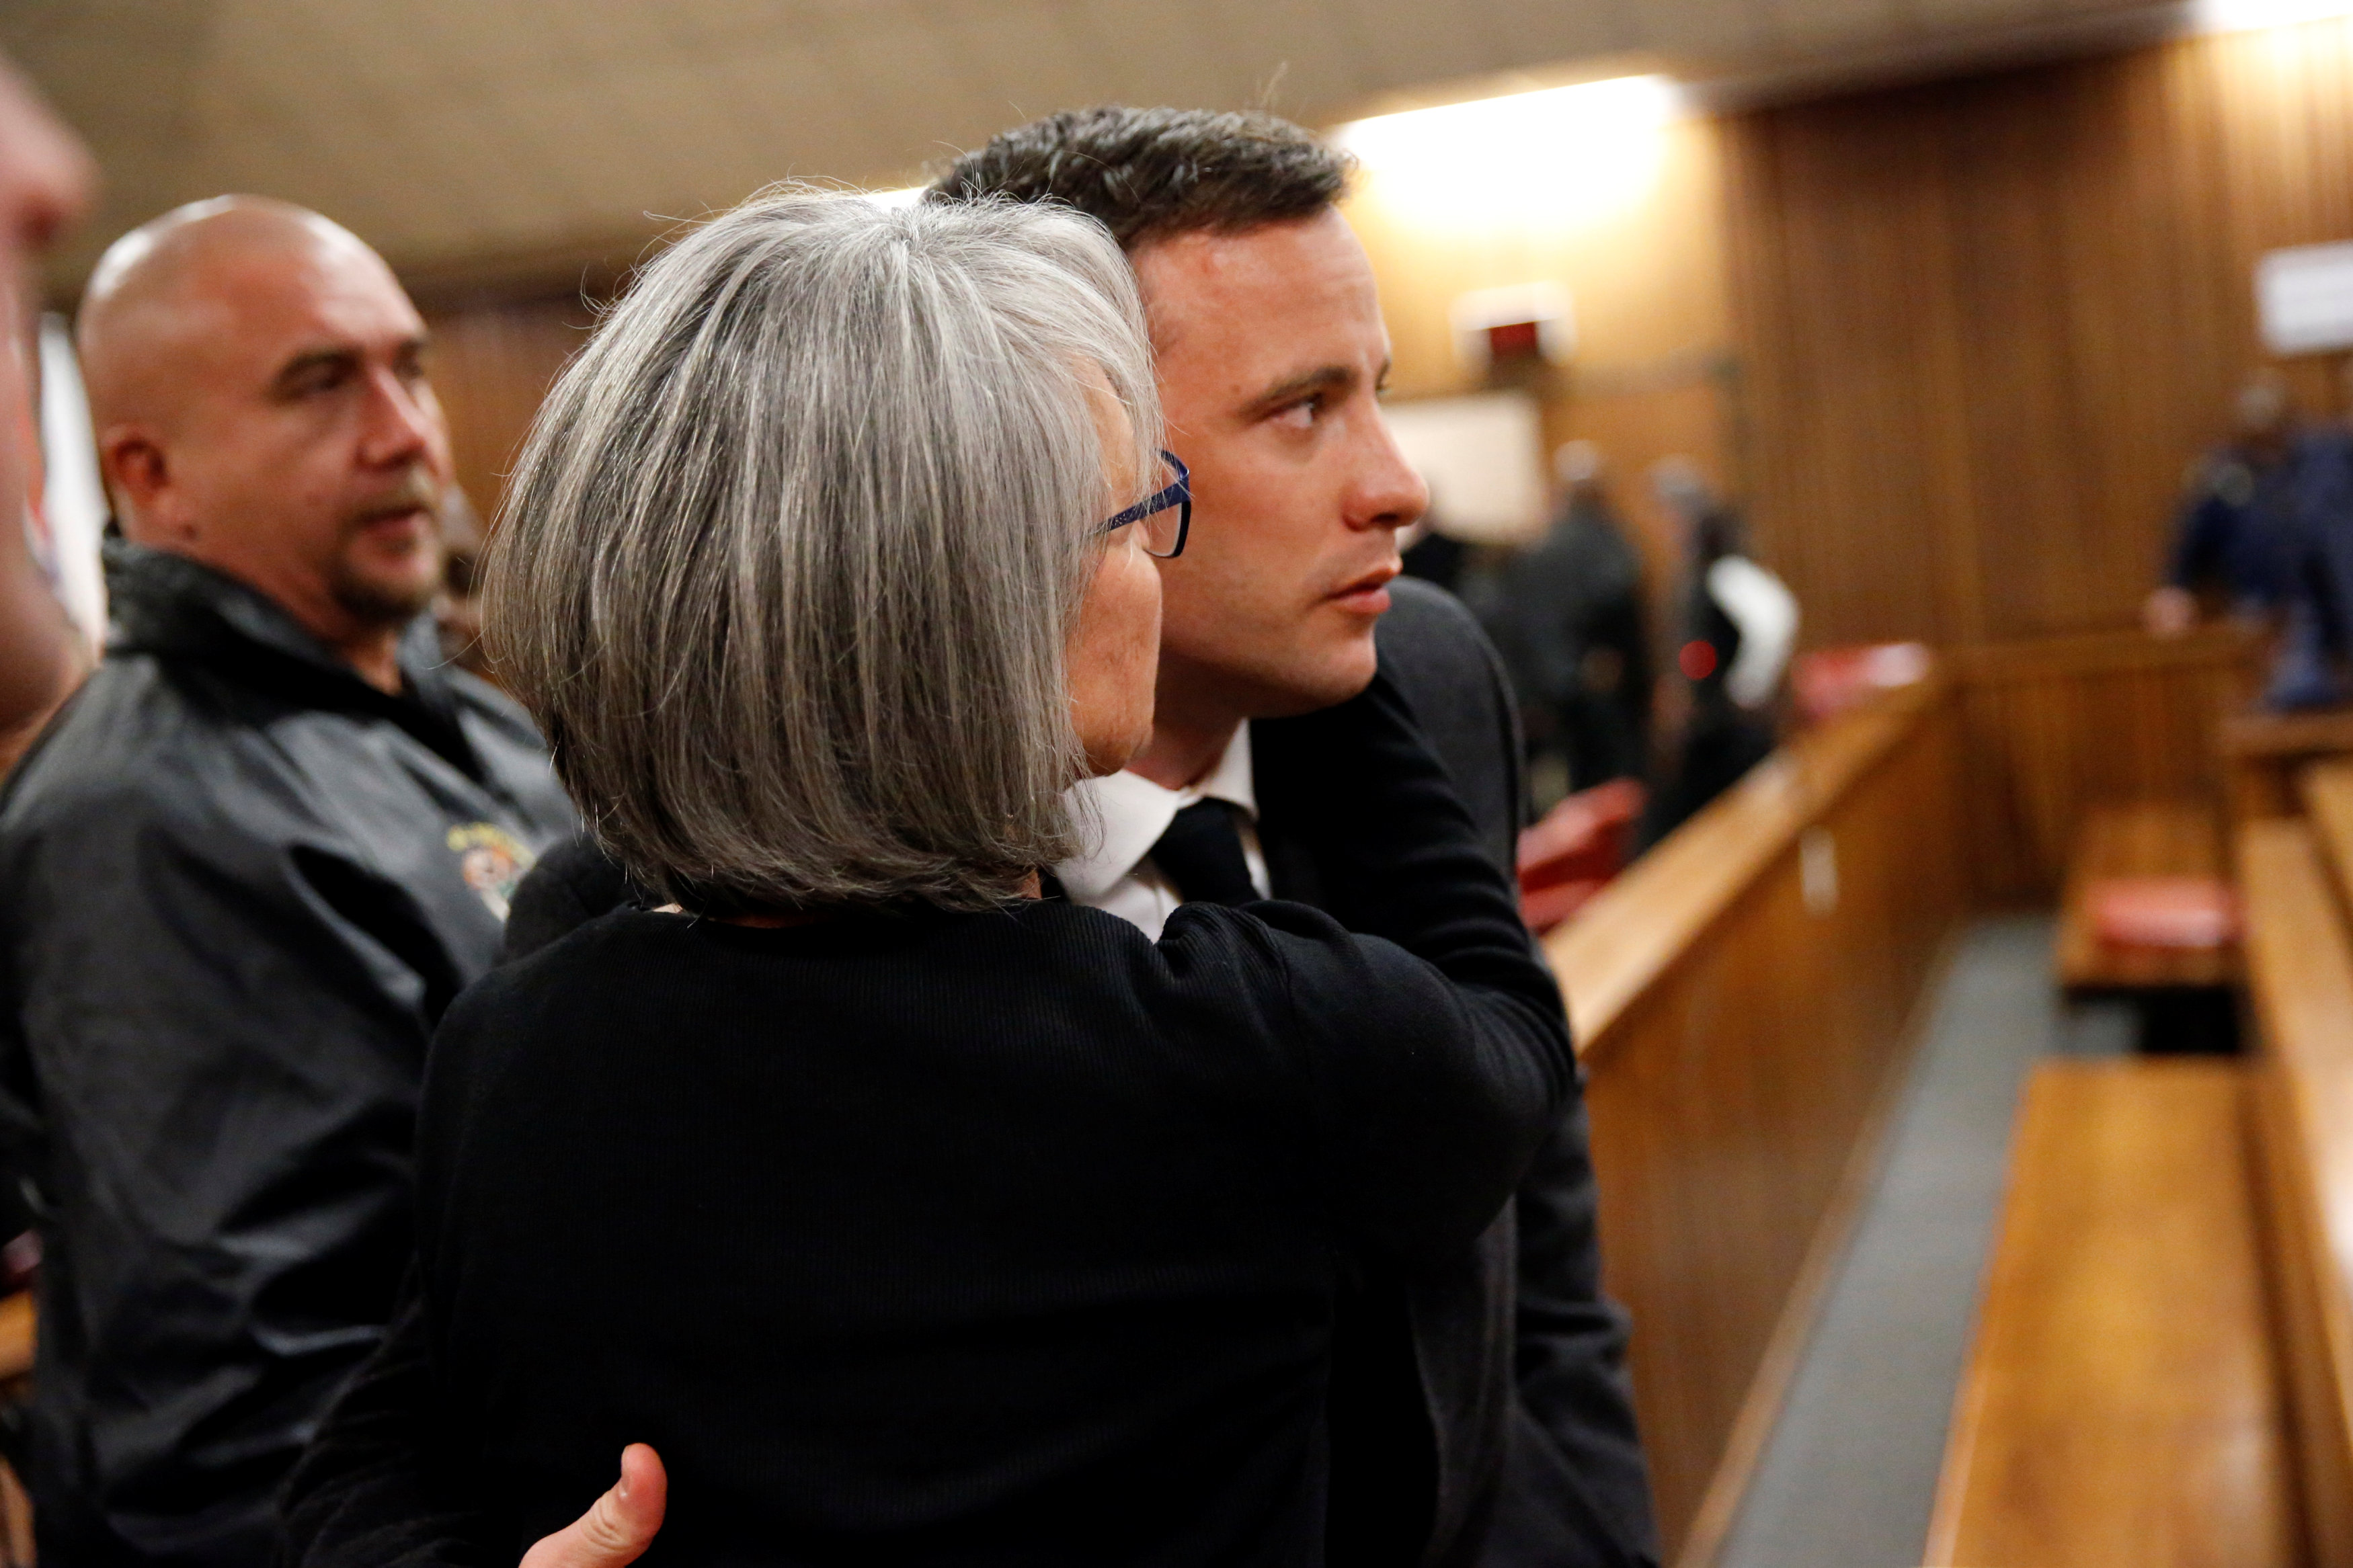 Olympic and Paralympic track star Oscar Pistorius reacts with a family member at his sentence hearing at the North Gauteng High Court in Pretoria, South Africa, July 6, 2016. REUTERS/Marco Longari/Pool